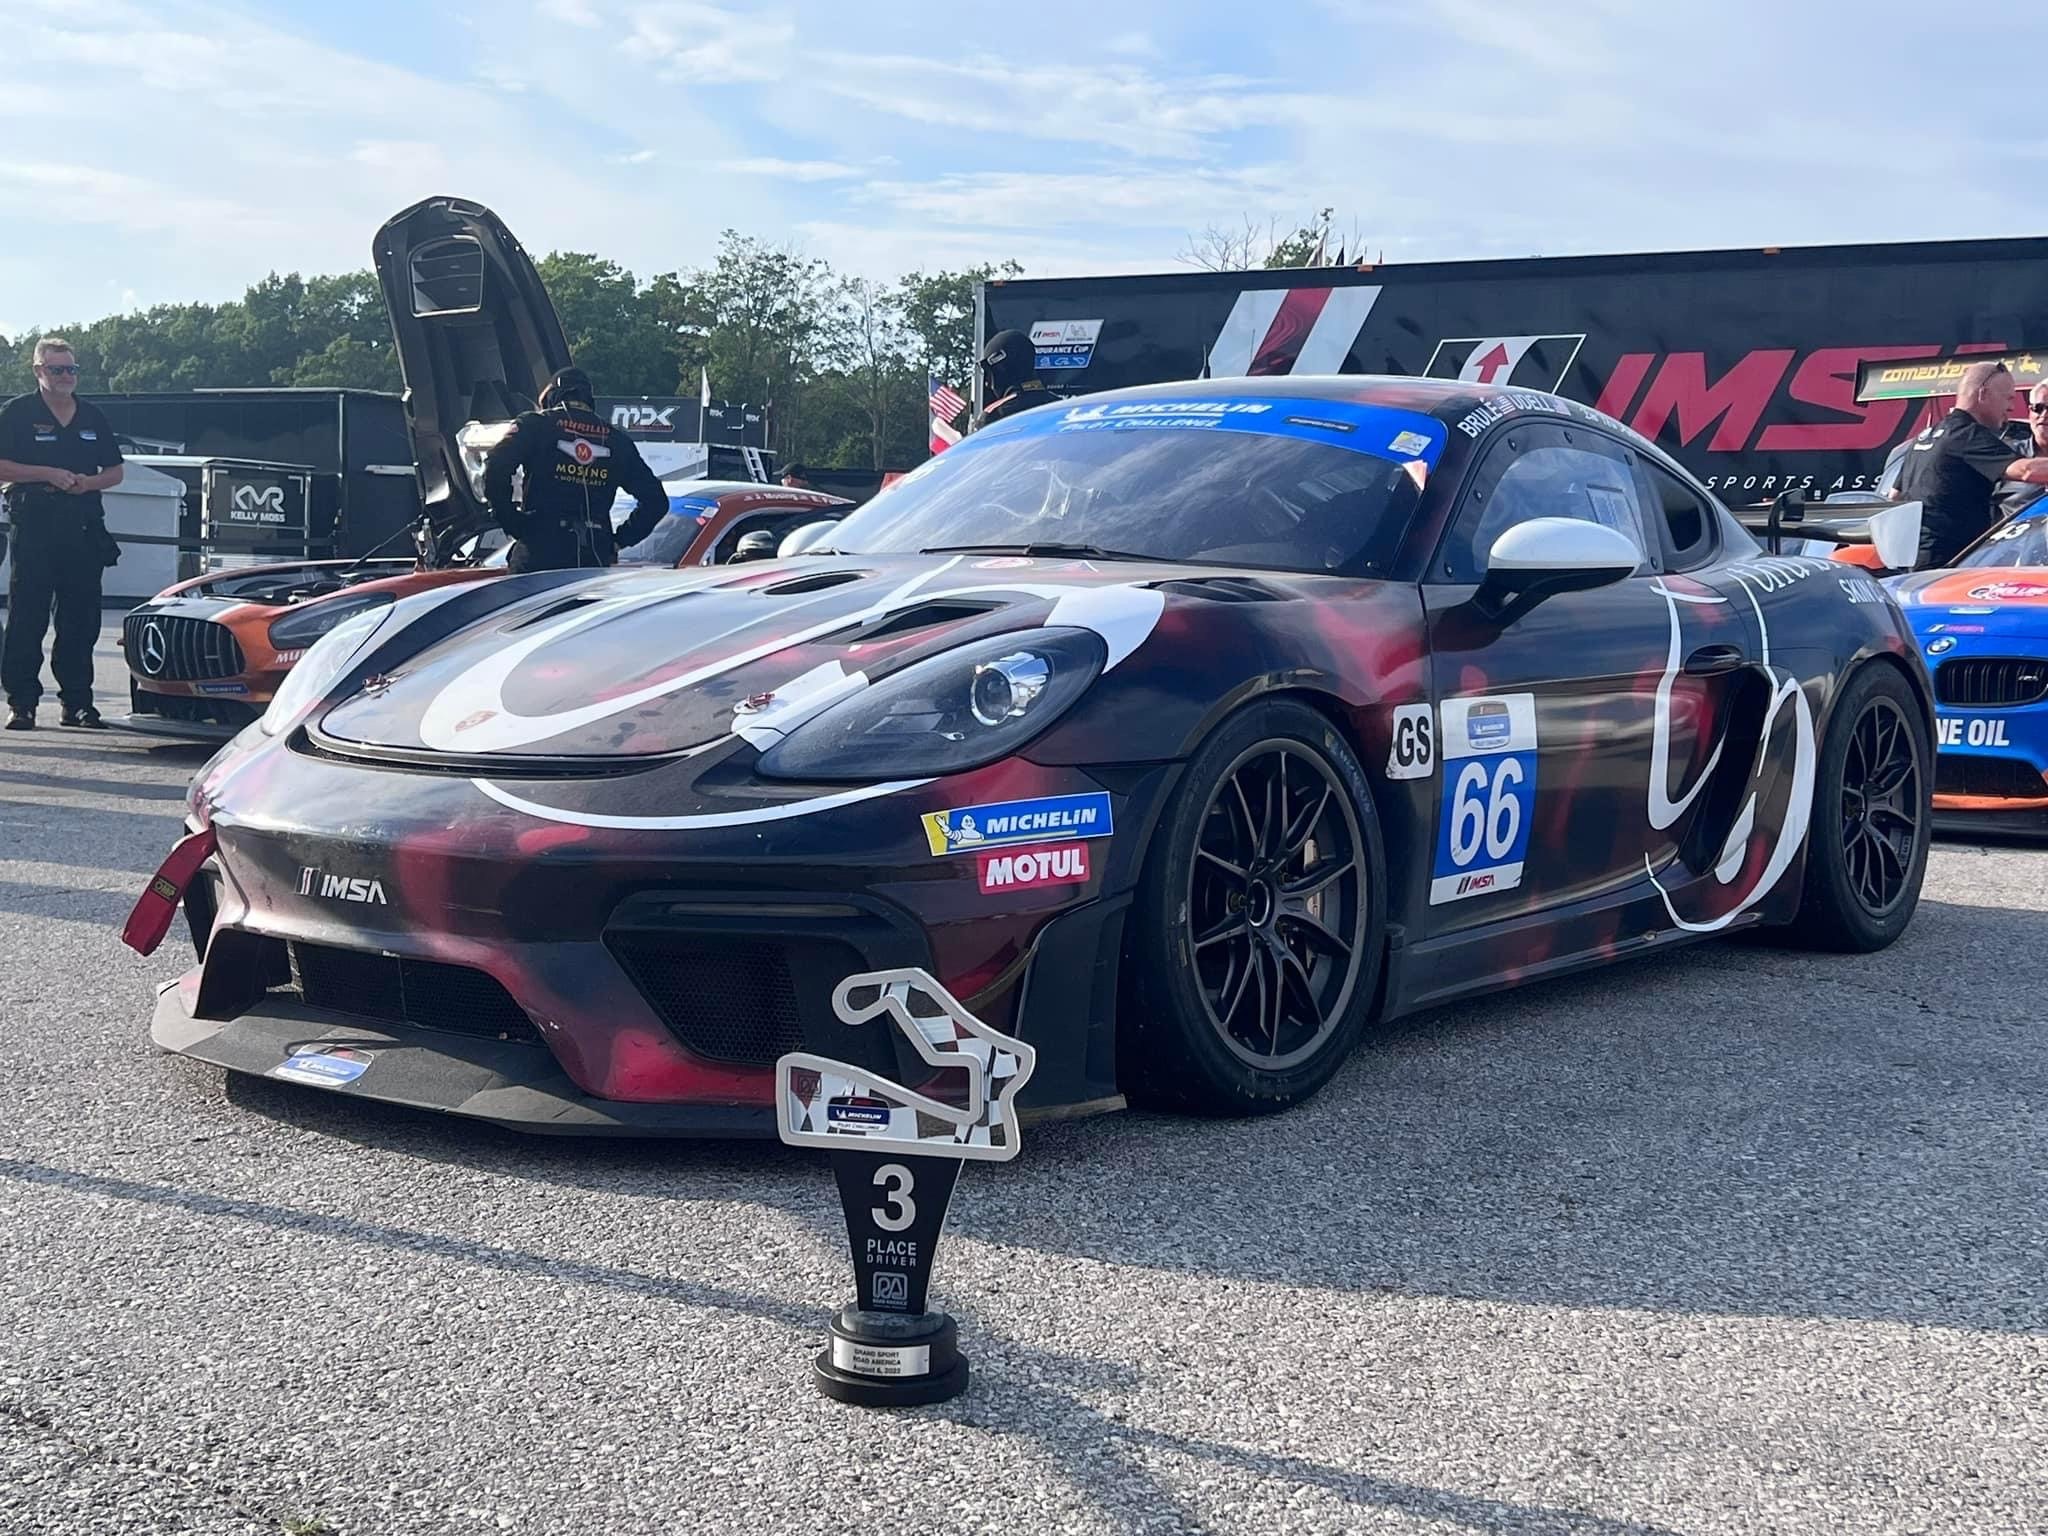 IMSA GS (GT4) 3rd Place Finish At Road America - Kelly-Moss Road and Race with Archangel Motorsports